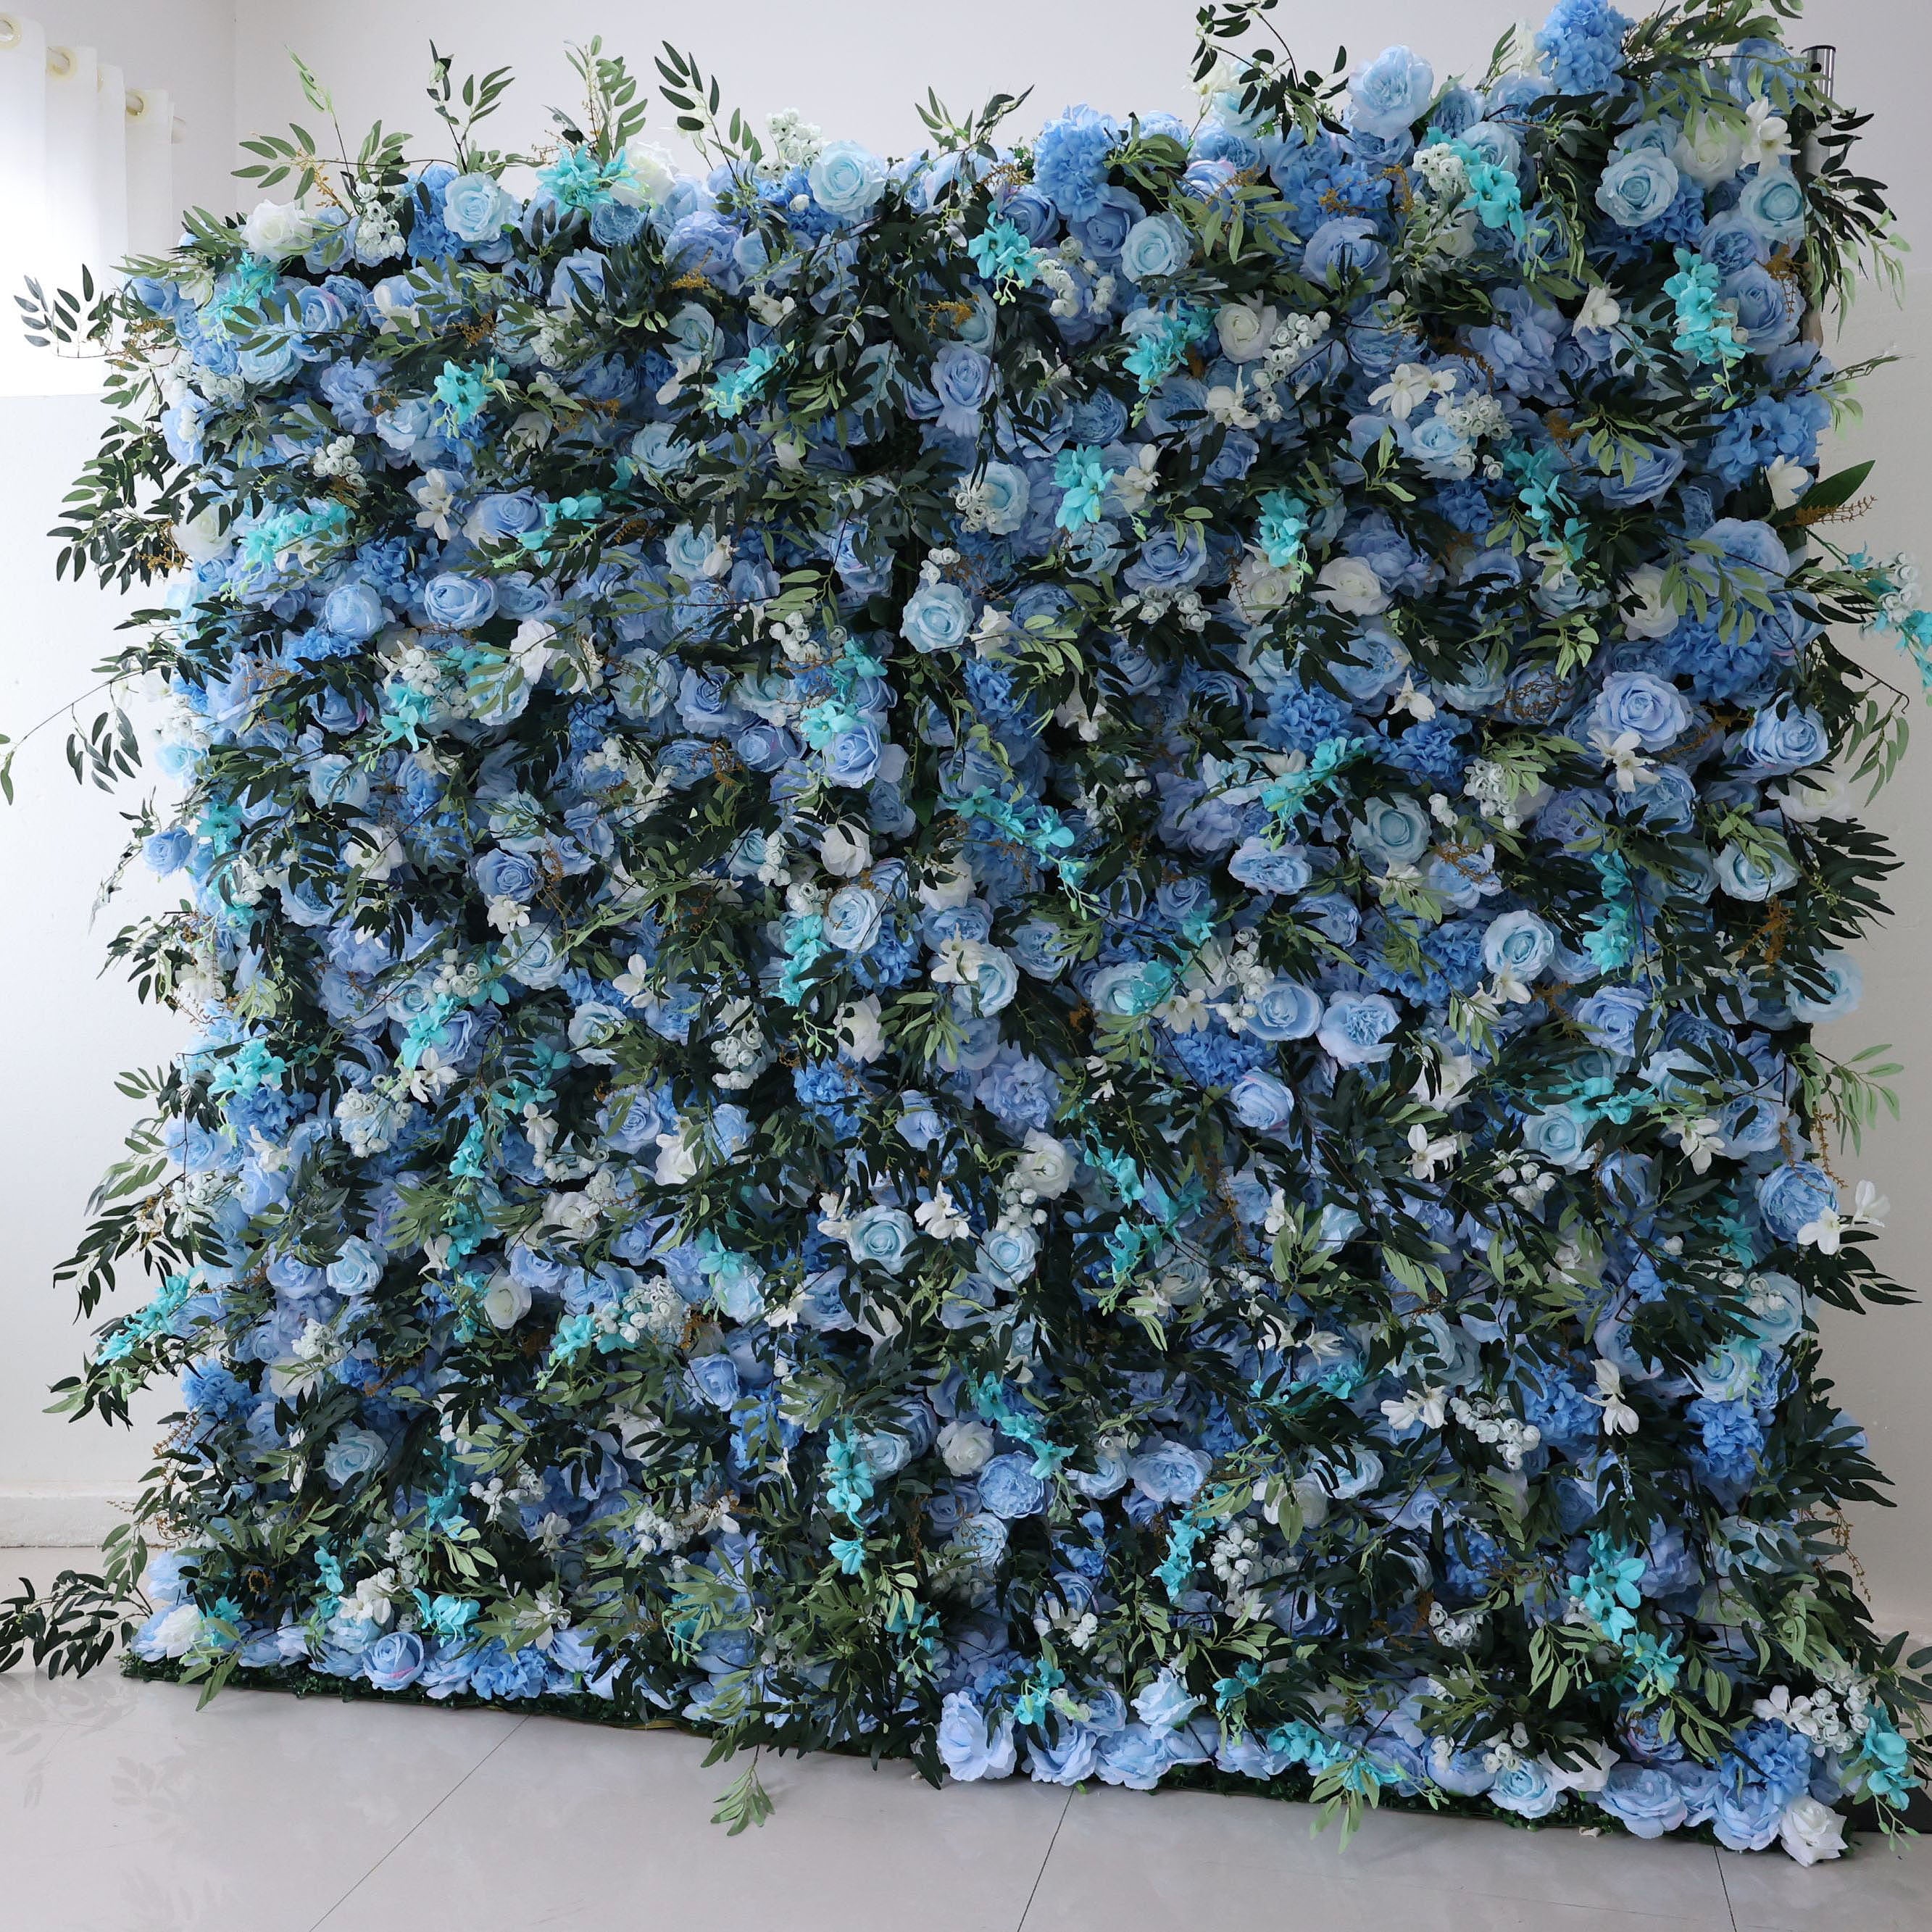 ValarFlowers Backdrop: Delve into Enchanted Bluewood, where deep blue roses meet lush green foliage. Transport your event to whimsical woodlands with this masterpiece.